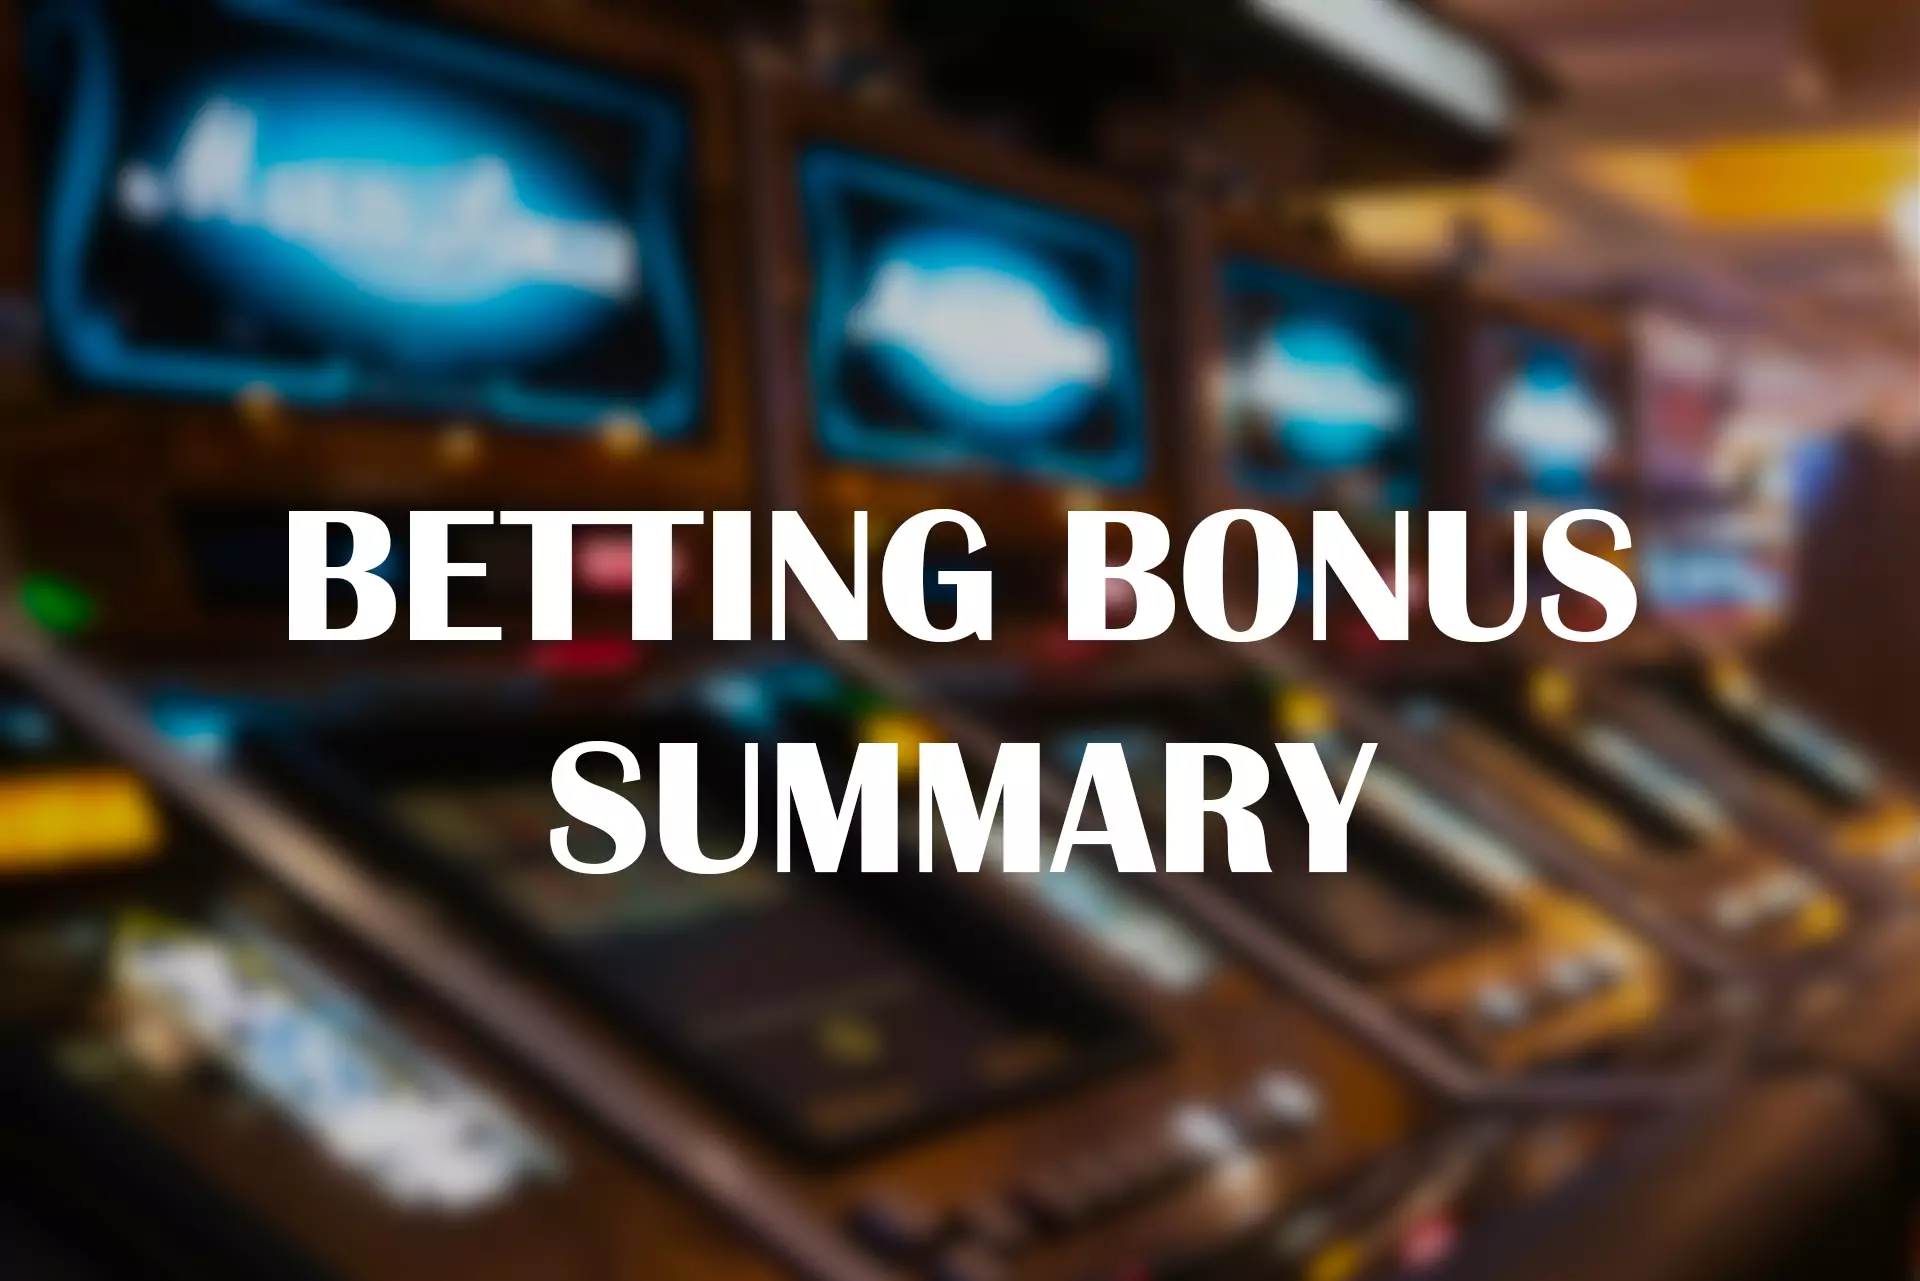 Here is our review about bonuses in the betting world.